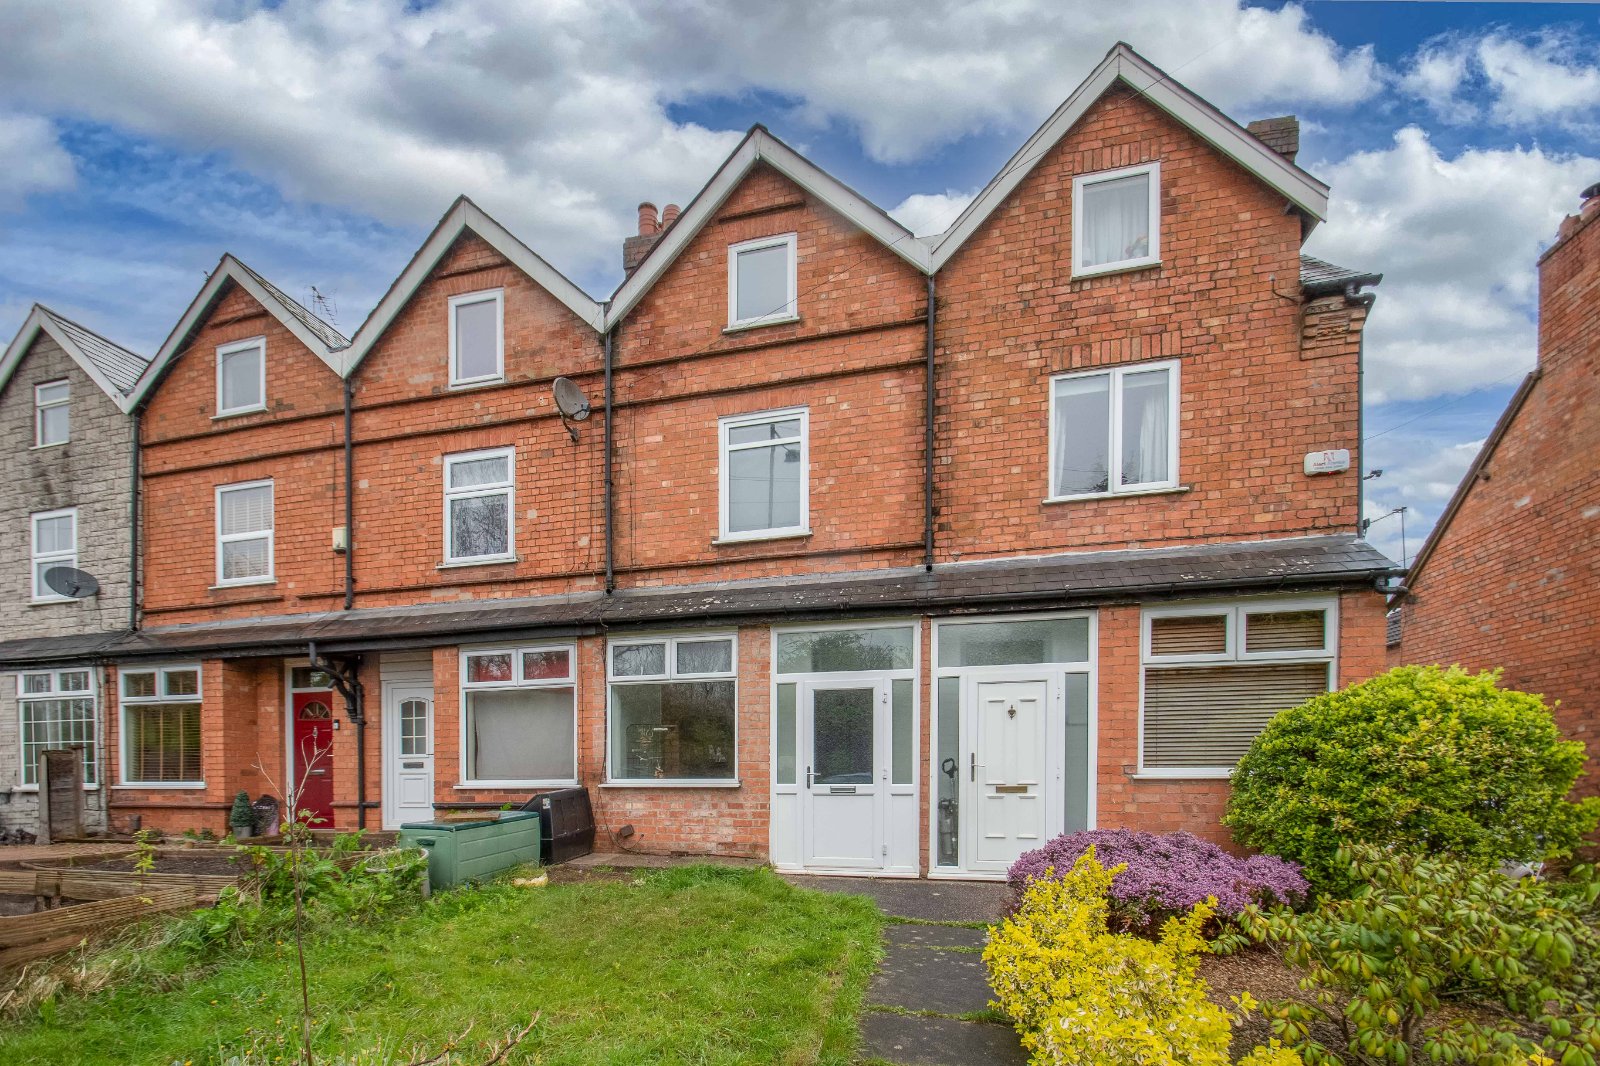 3 bed house for sale in The Slough, Redditch - Property Image 1